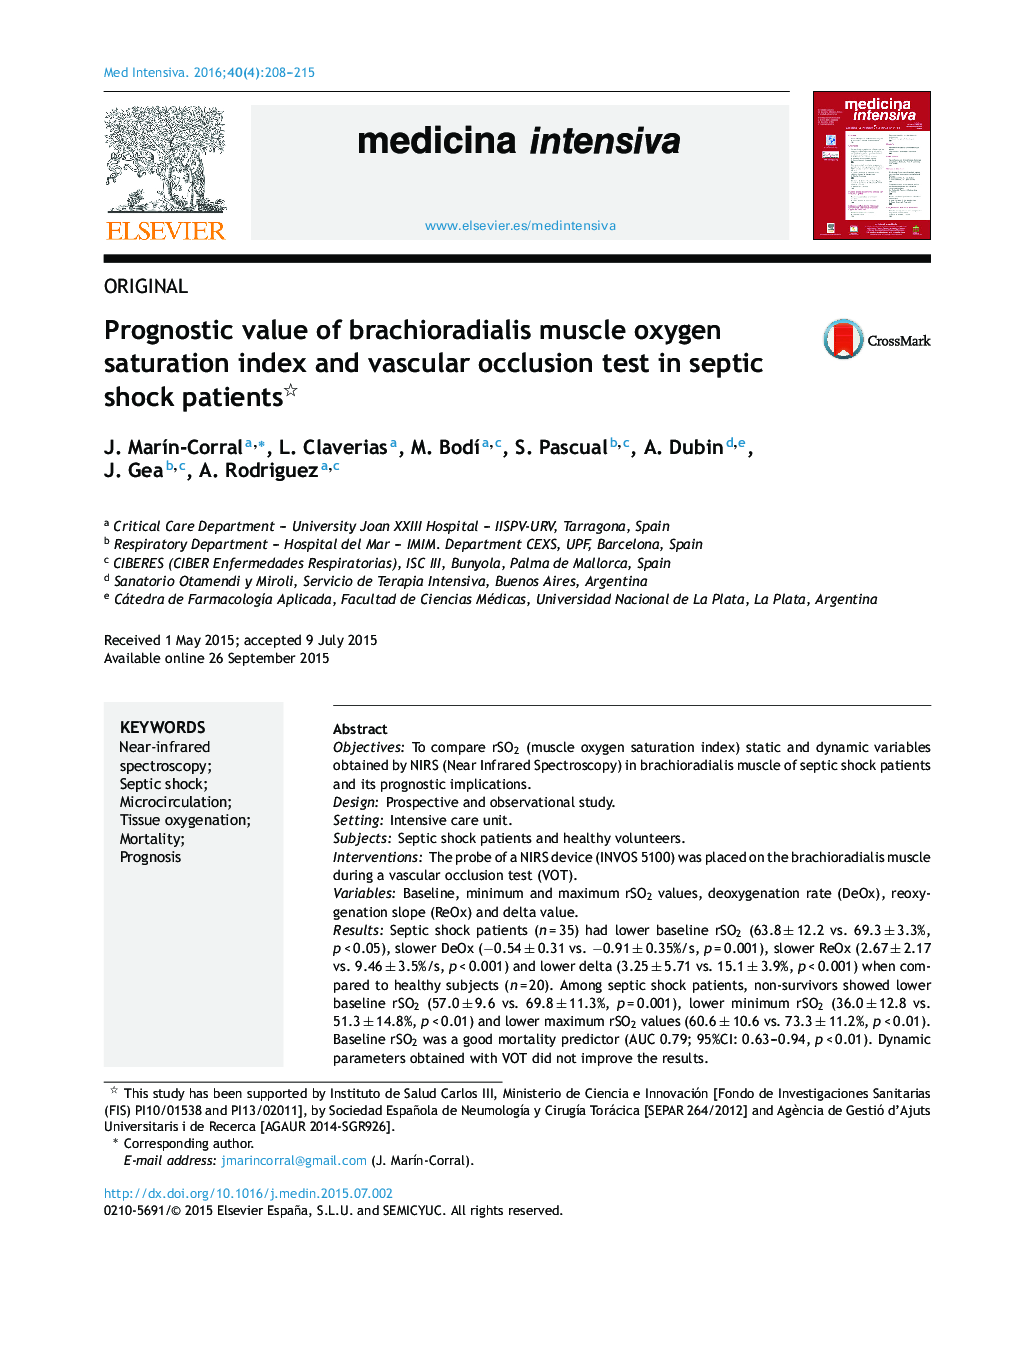 Prognostic value of brachioradialis muscle oxygen saturation index and vascular occlusion test in septic shock patients